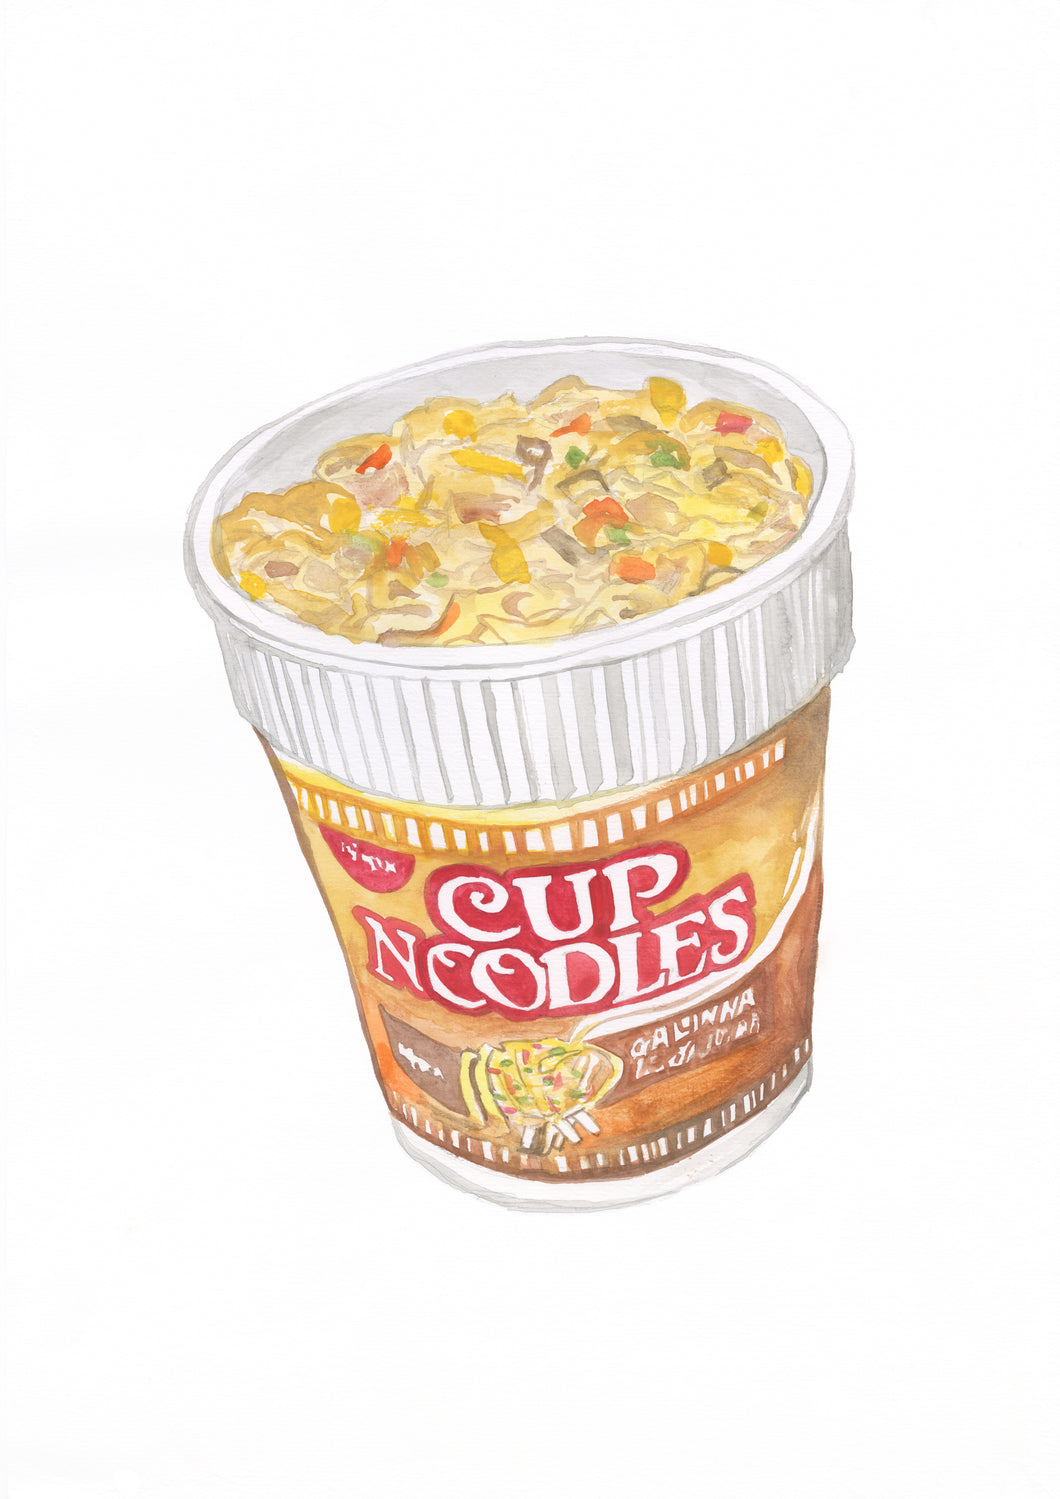 Cup Noodles (I spent all my money on living) - Art Print